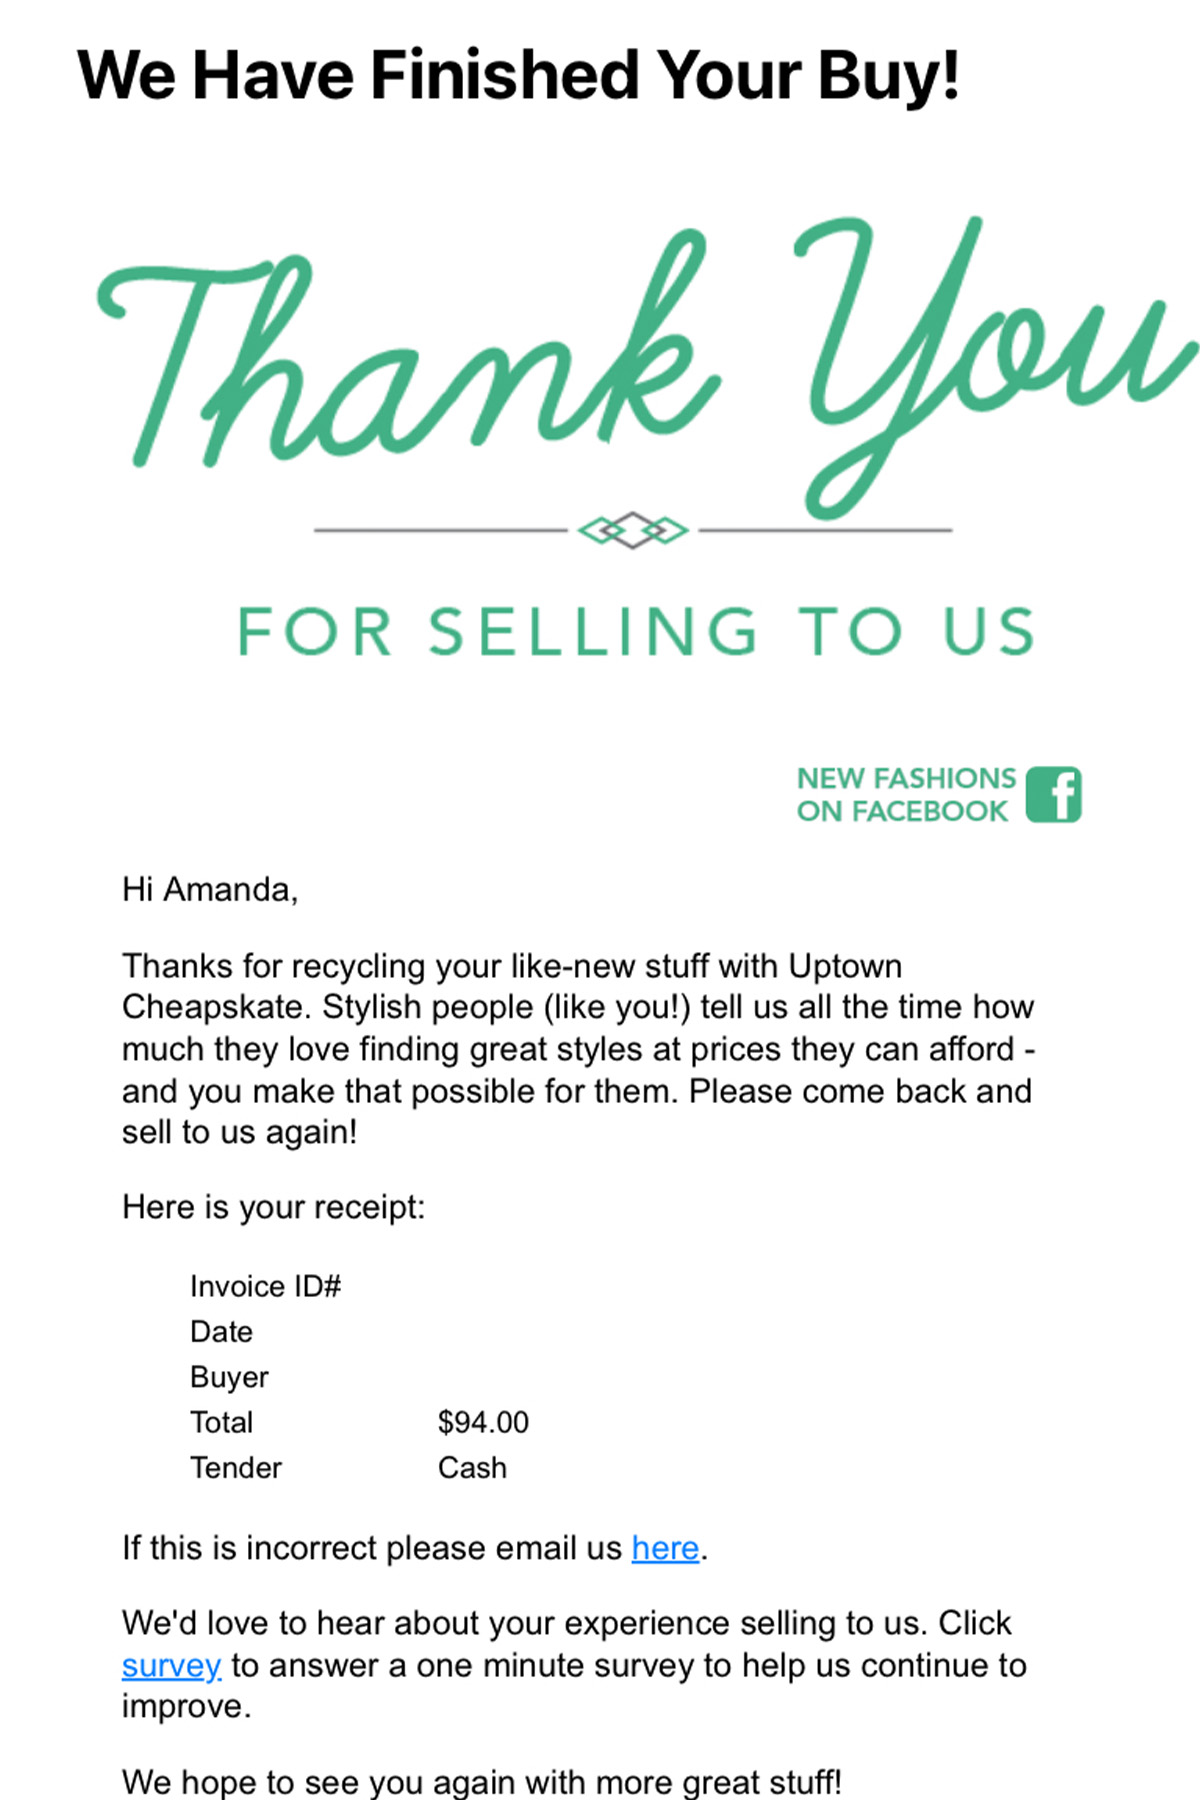 screenshot of an email from uptown cheapskate with a quote for a customer selling clothes.